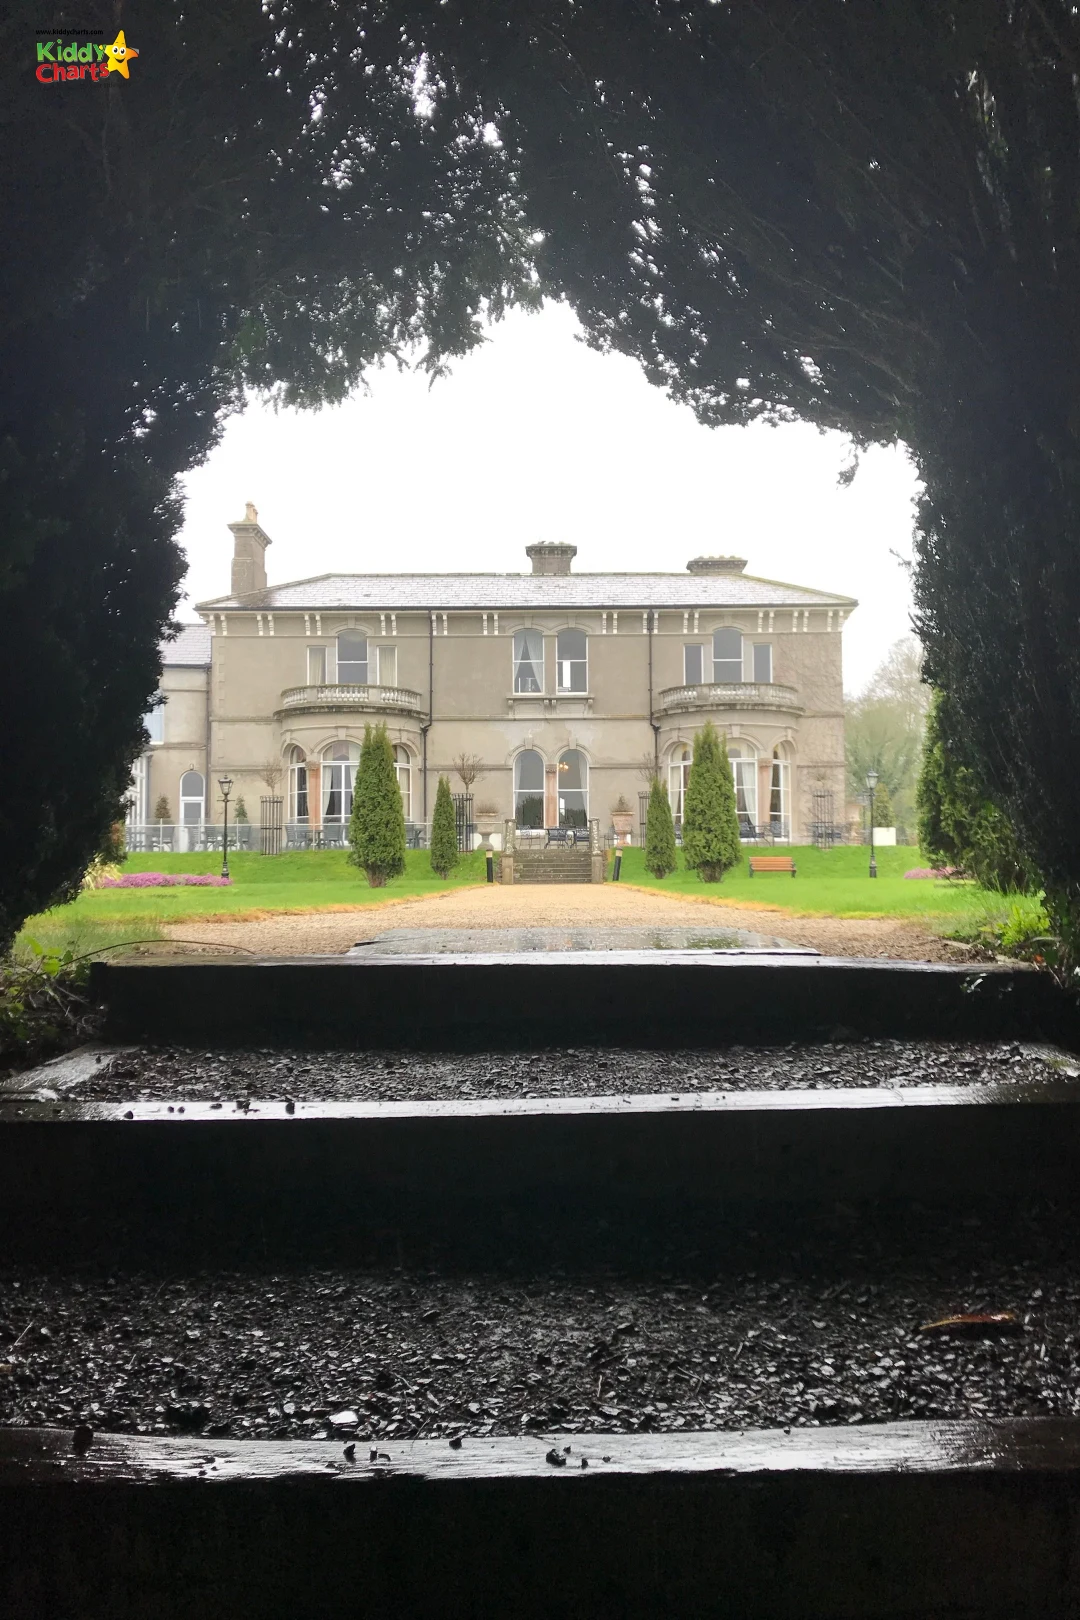 We take a look at the Lyrath Estate Hotel and review it as a destination for a short break. Find out what we thought! #hotels #ireland #reviews #shortbreaks #kilkenny #cities